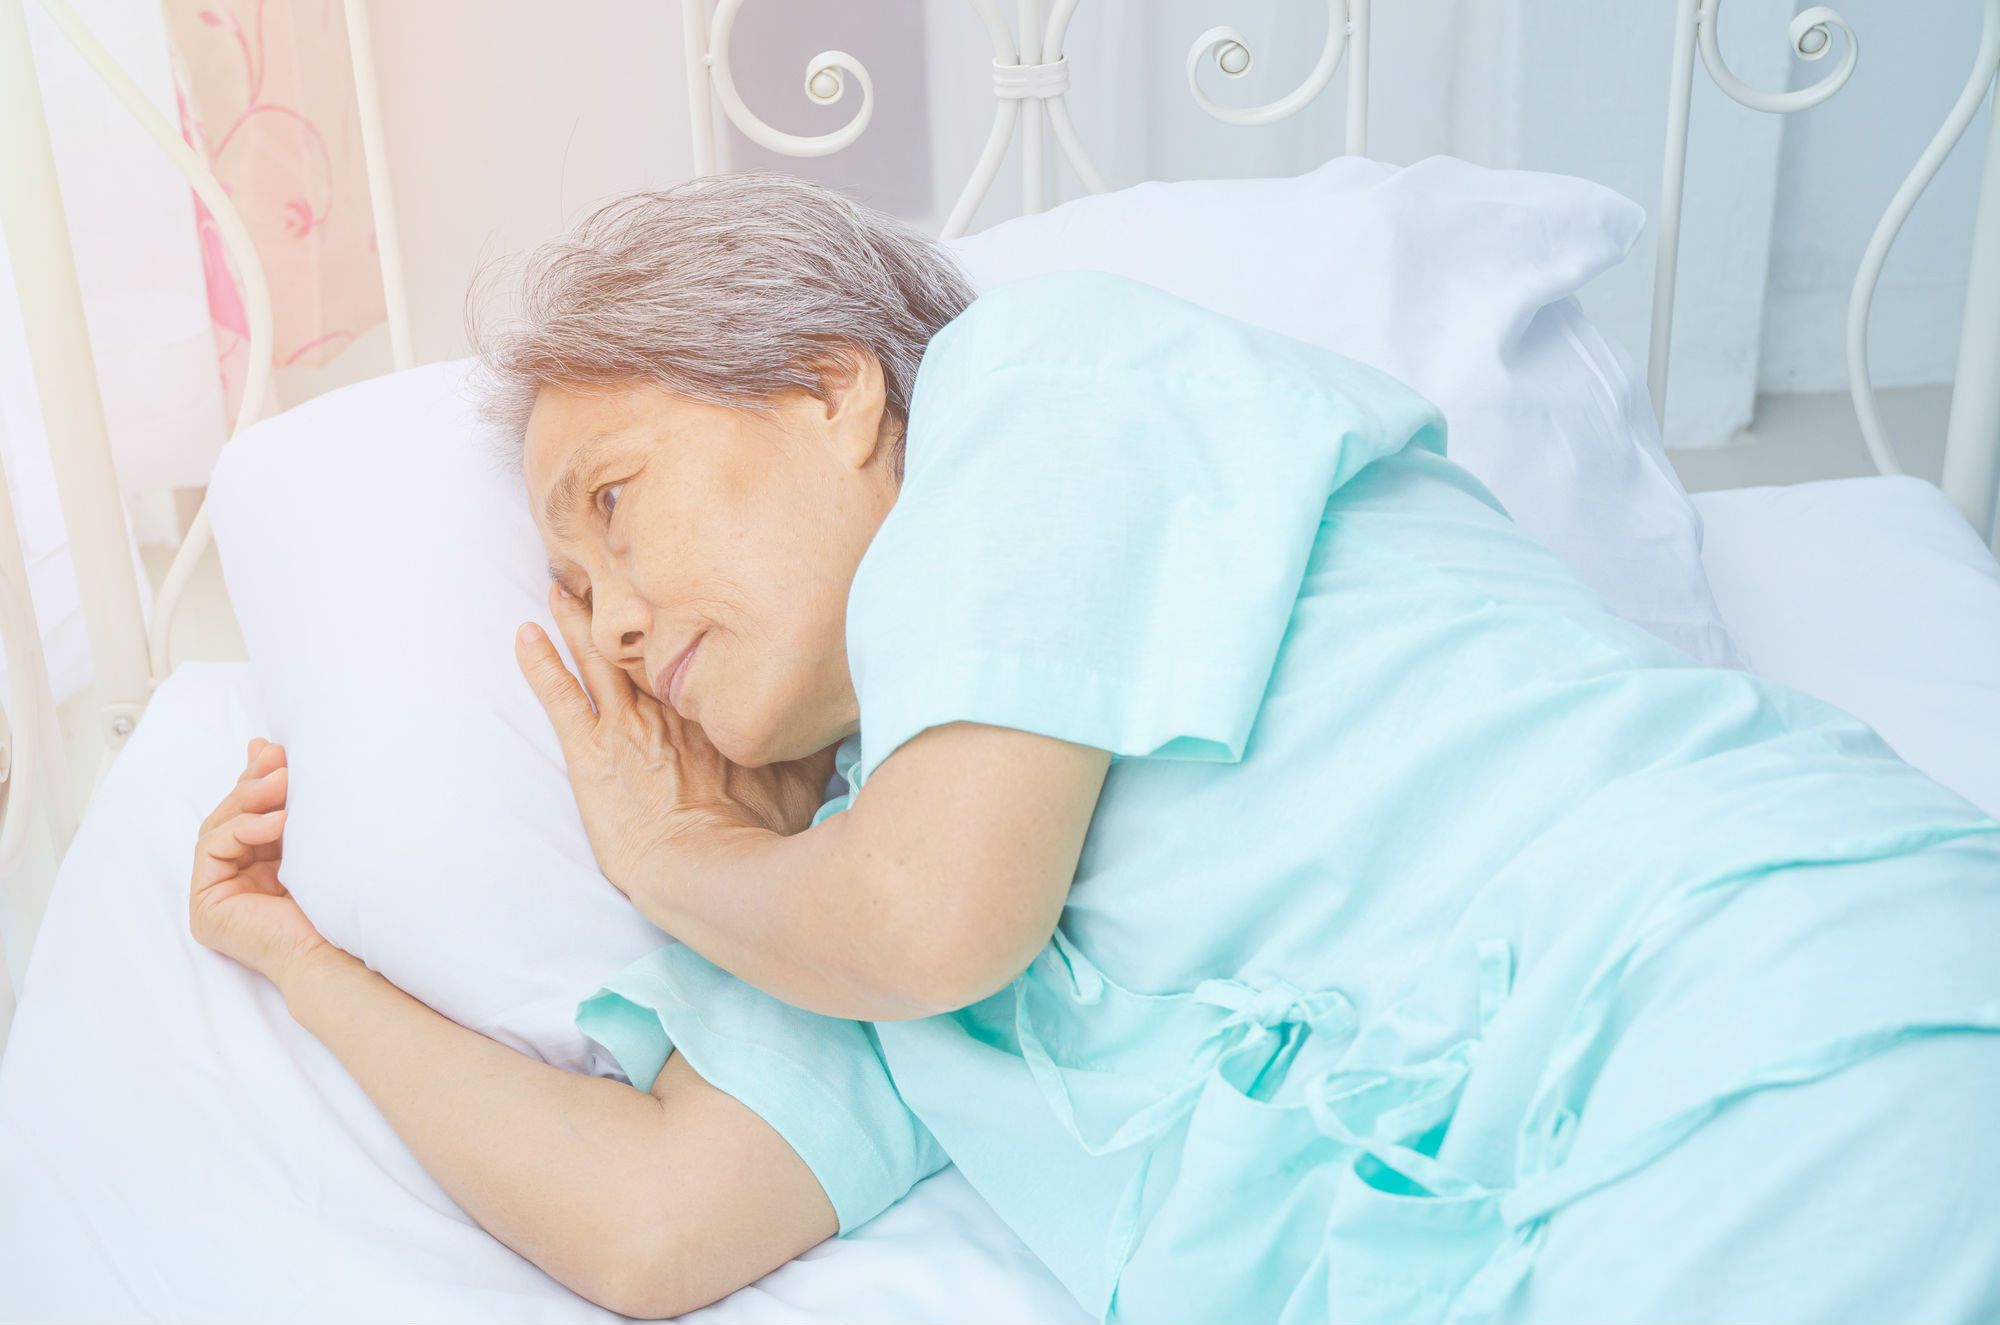 Nursing home neglect is more common than many people realize.